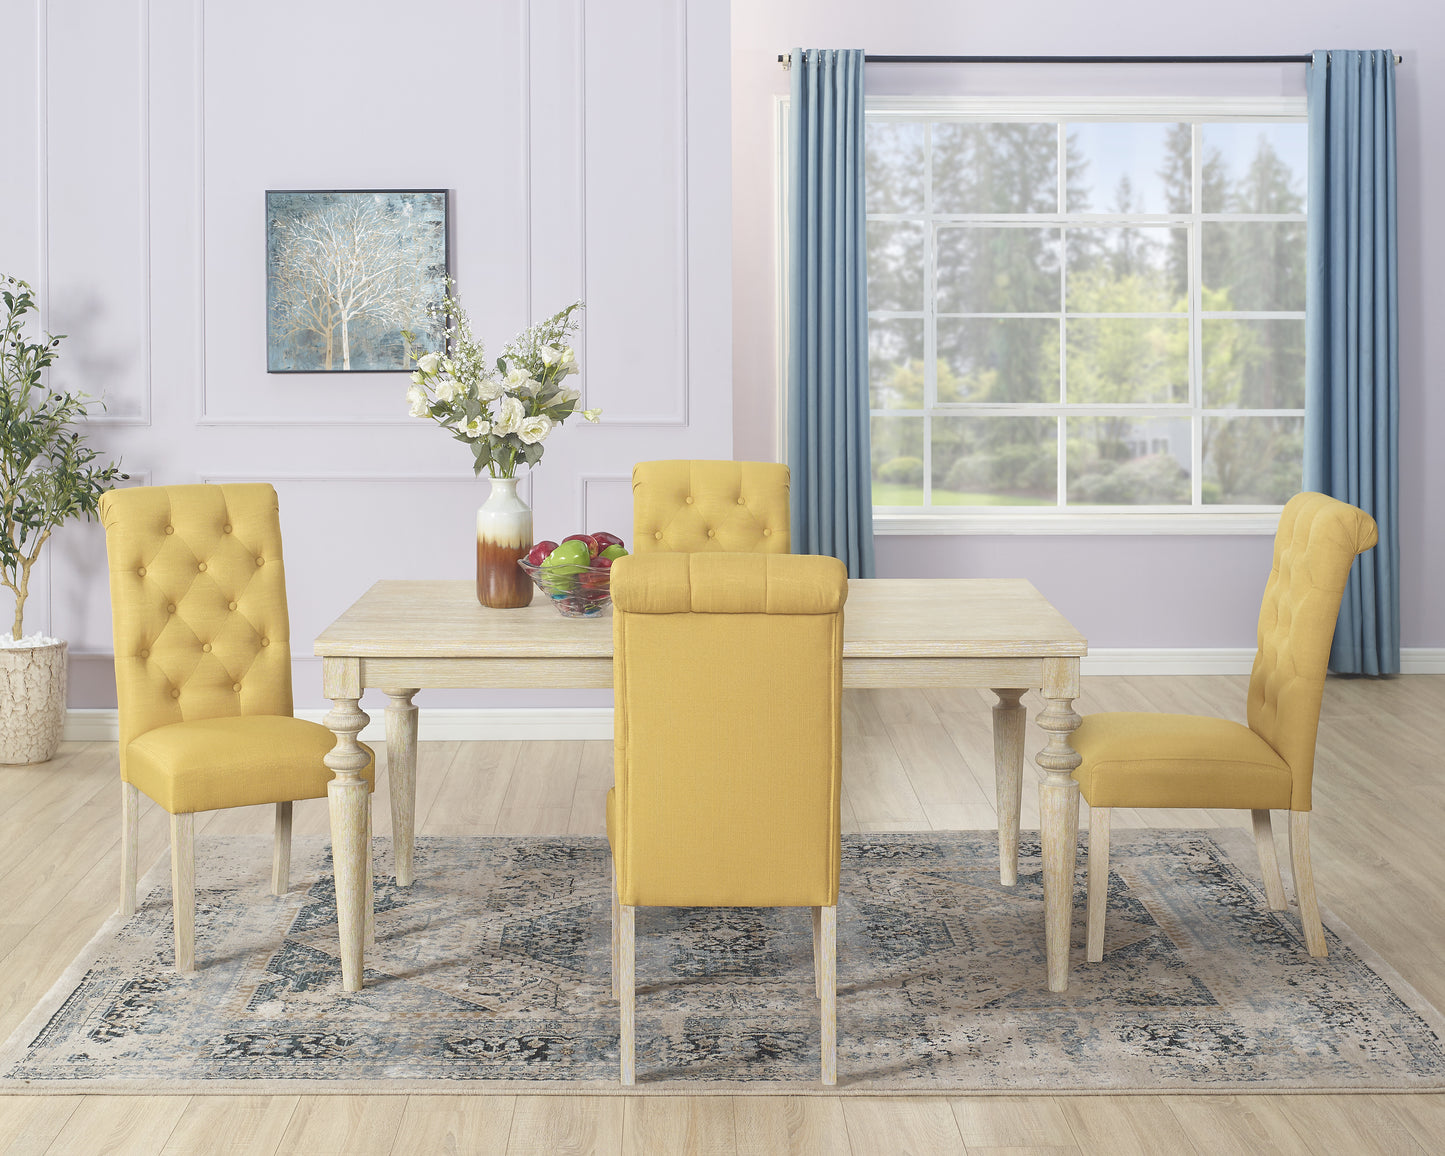 Amonia 5-piece Dining Set, Turned-Leg Dining Table with 4 Tufted Chairs